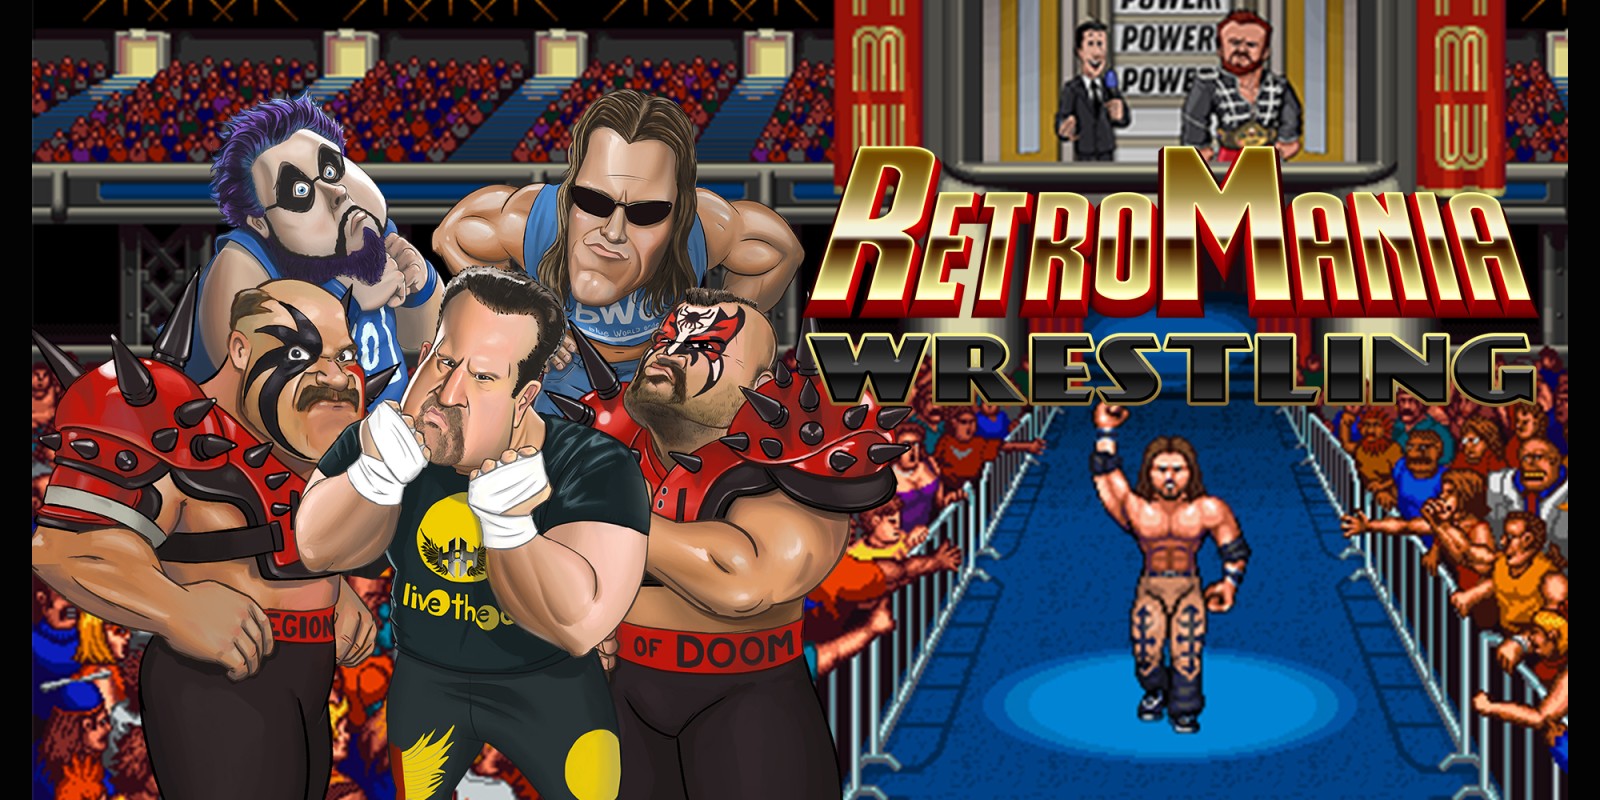 Last Game You Finished And Your Four-ghts - Page 30 H2x1_NSwitchDS_RetroManiaWrestling_image1600w